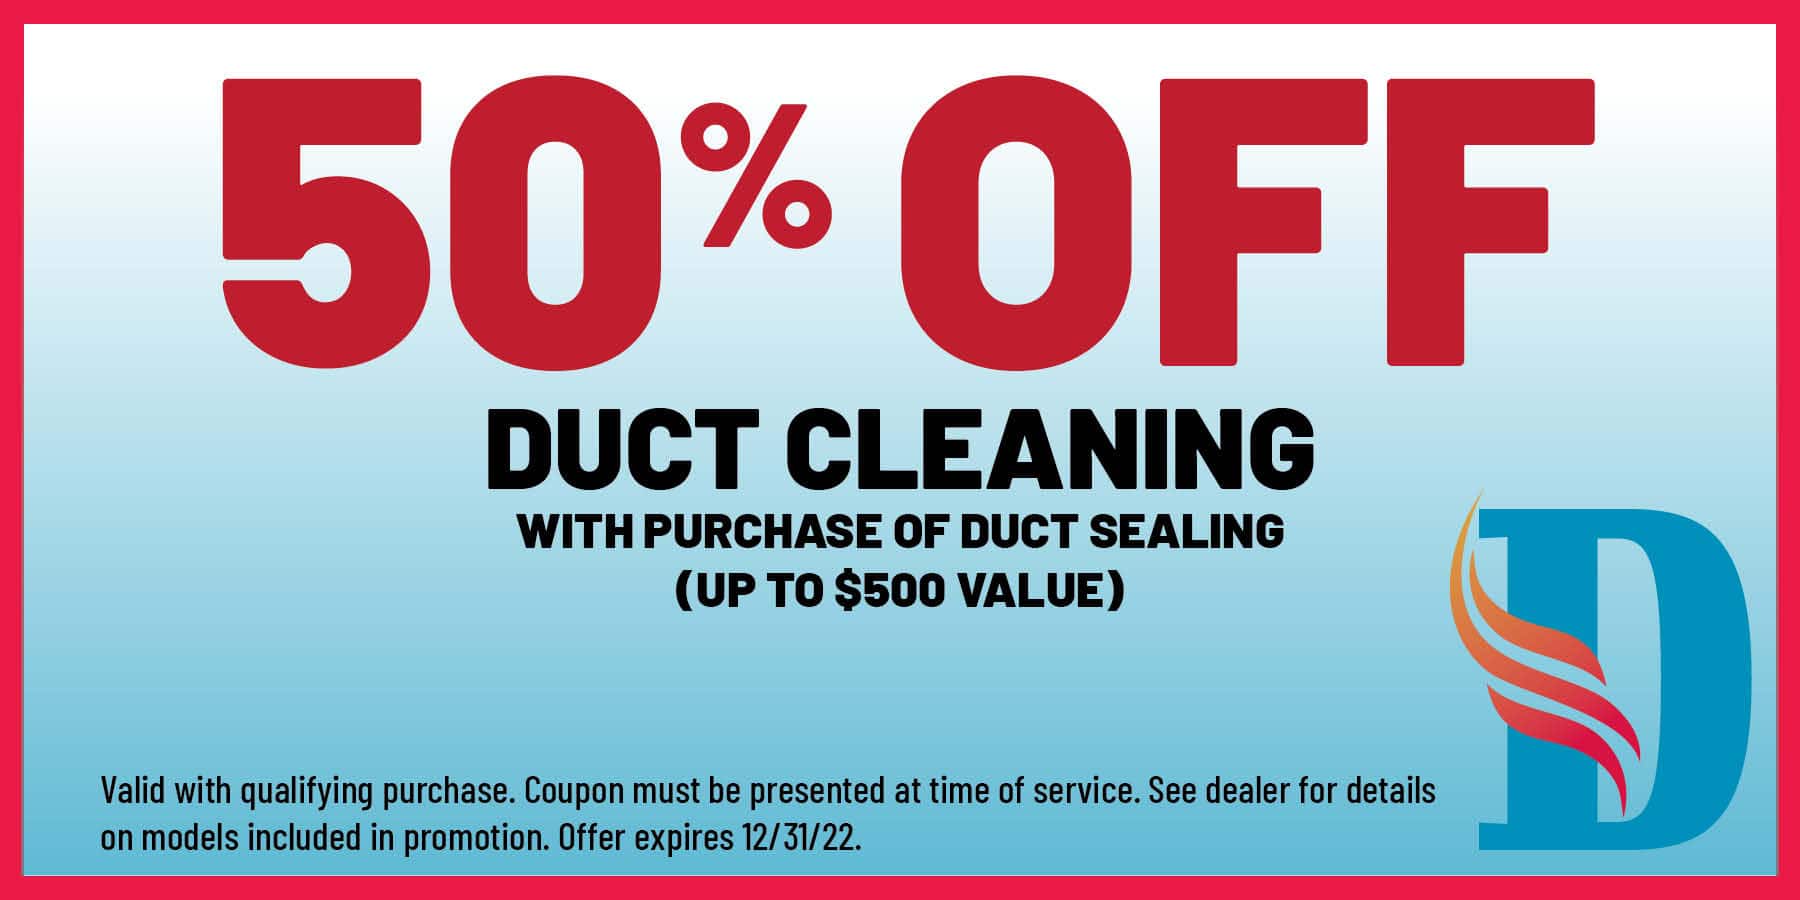 50% off duct cleaning with purchase of duct sealing (up to 0 value) coupon.